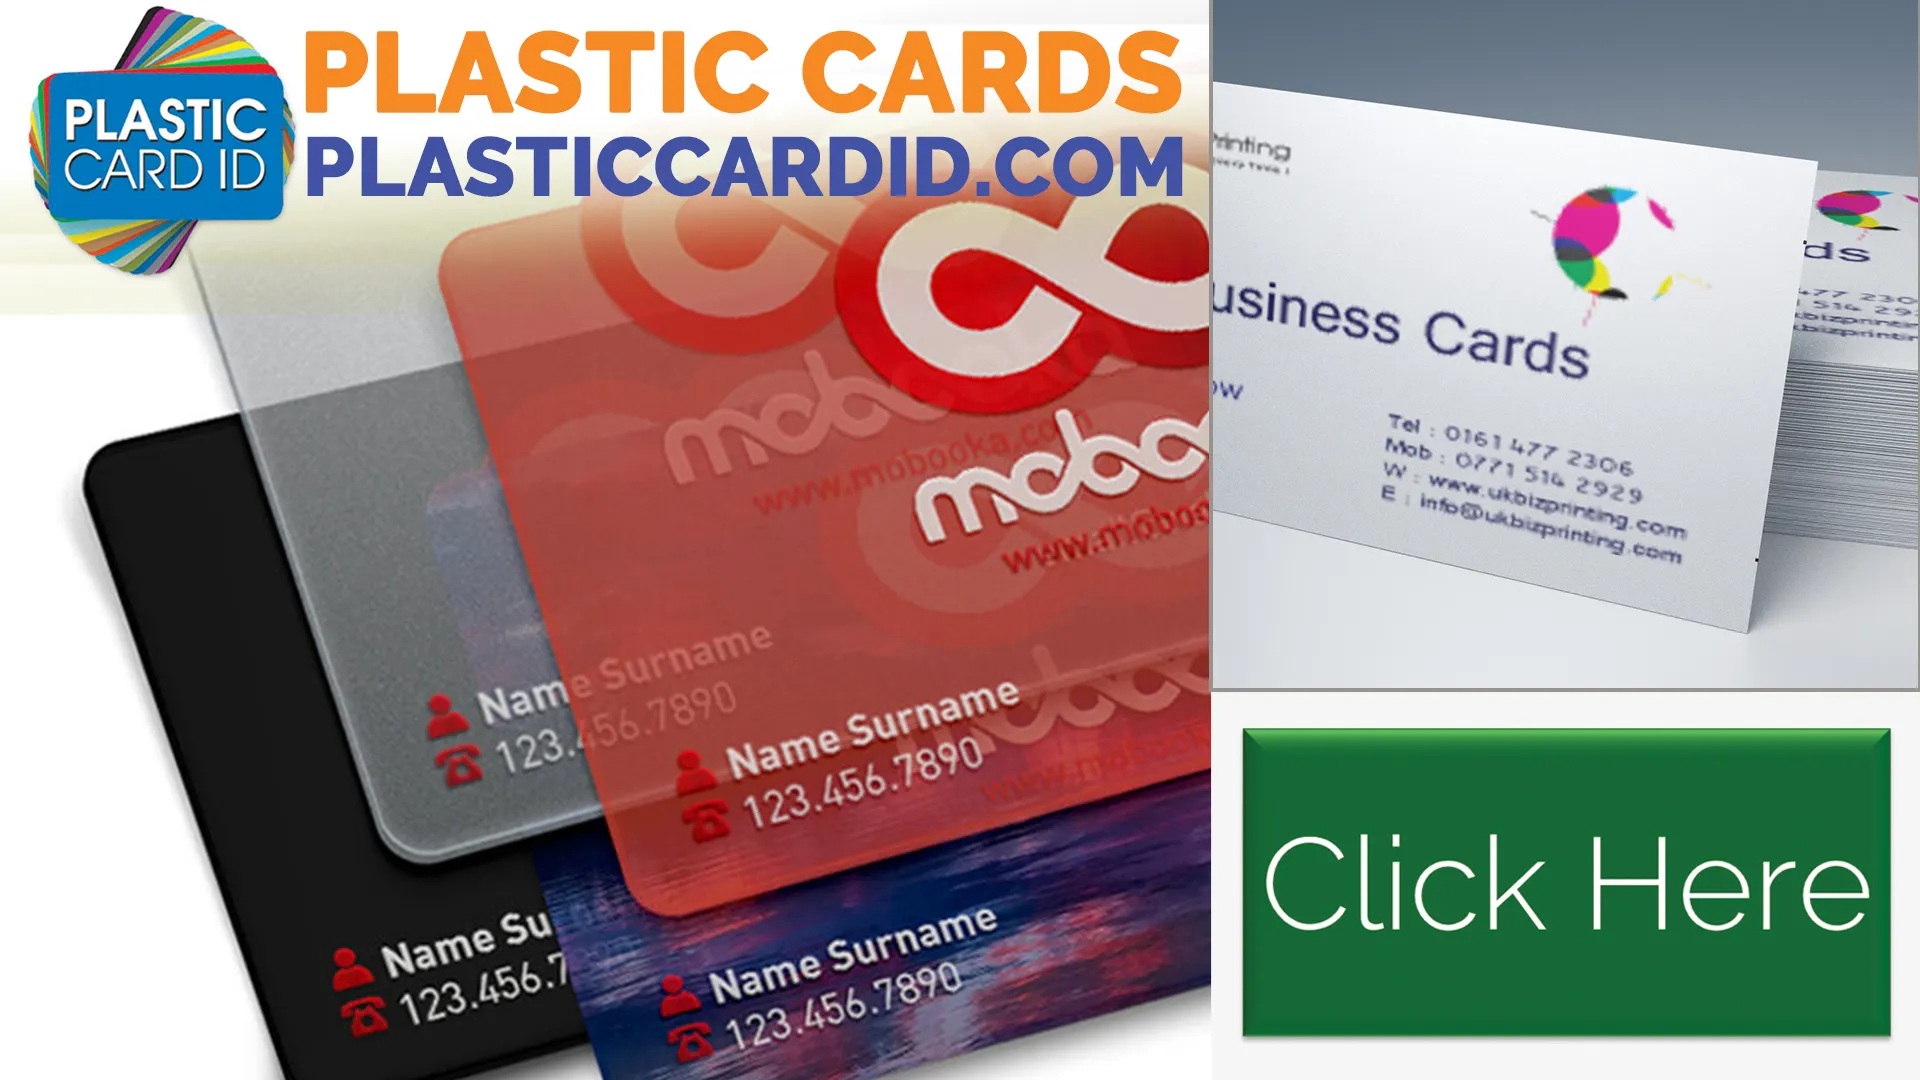 Expanding Your Reach with Plastic Card Printers